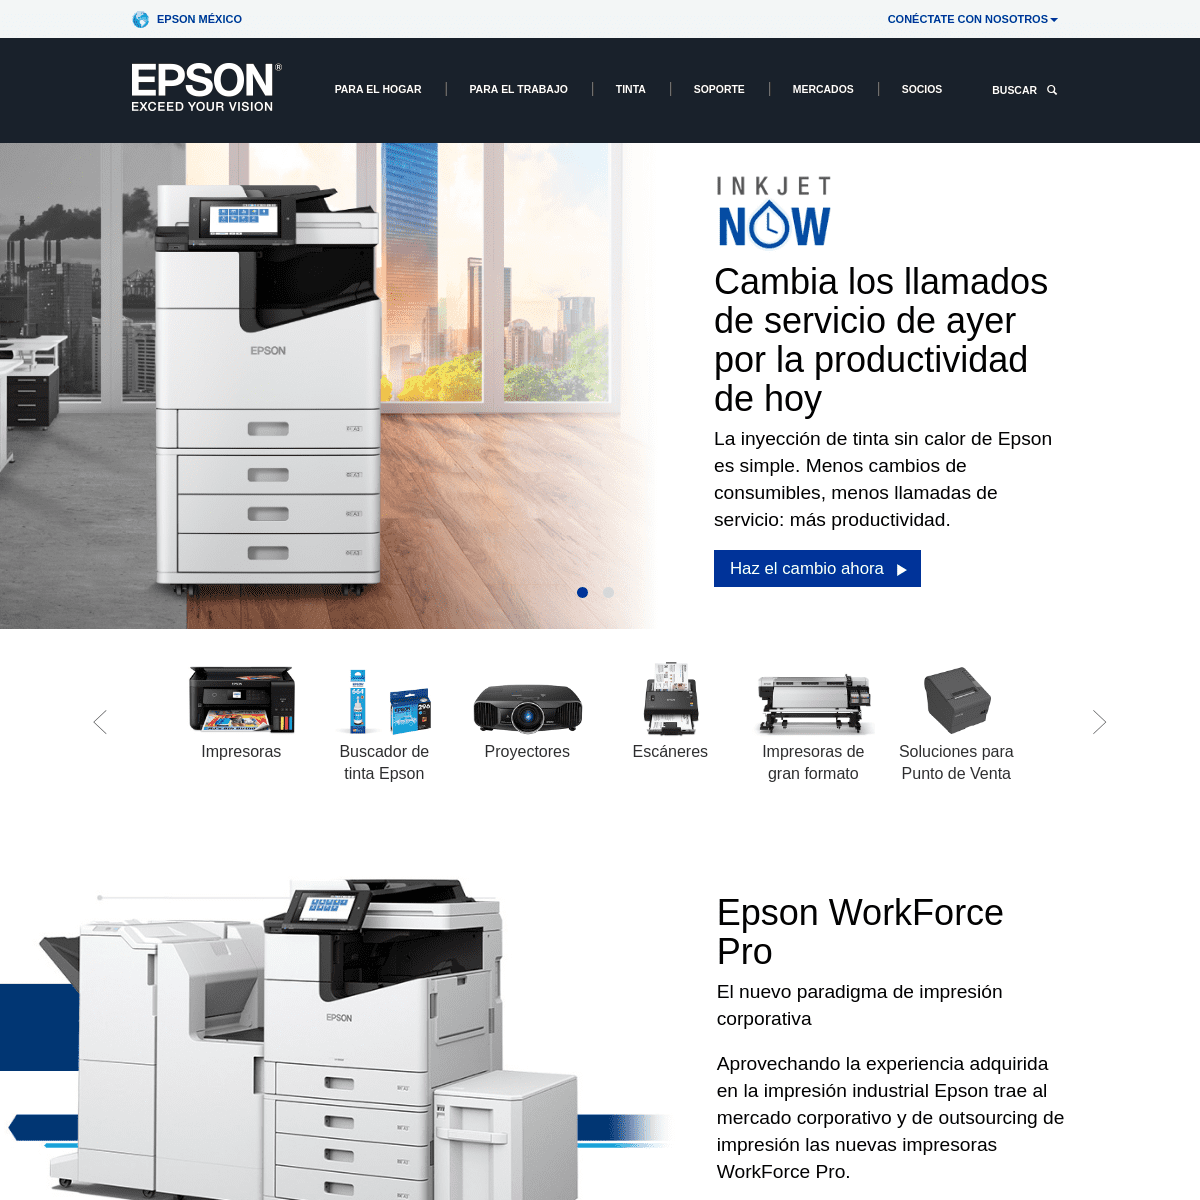 A complete backup of epson.com.mx